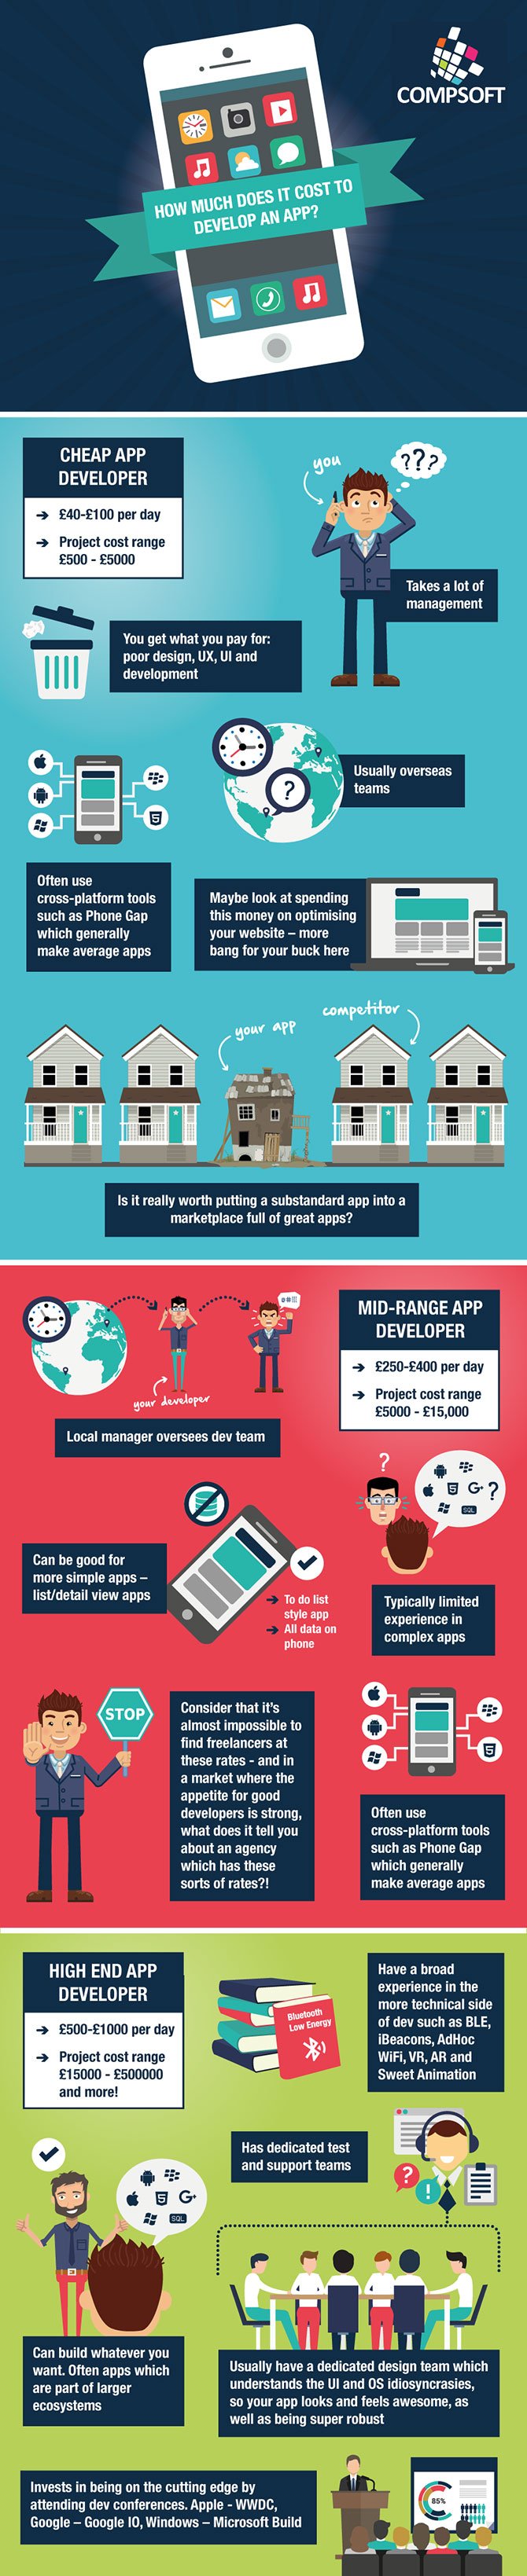 how much does it cost to build an app infographic